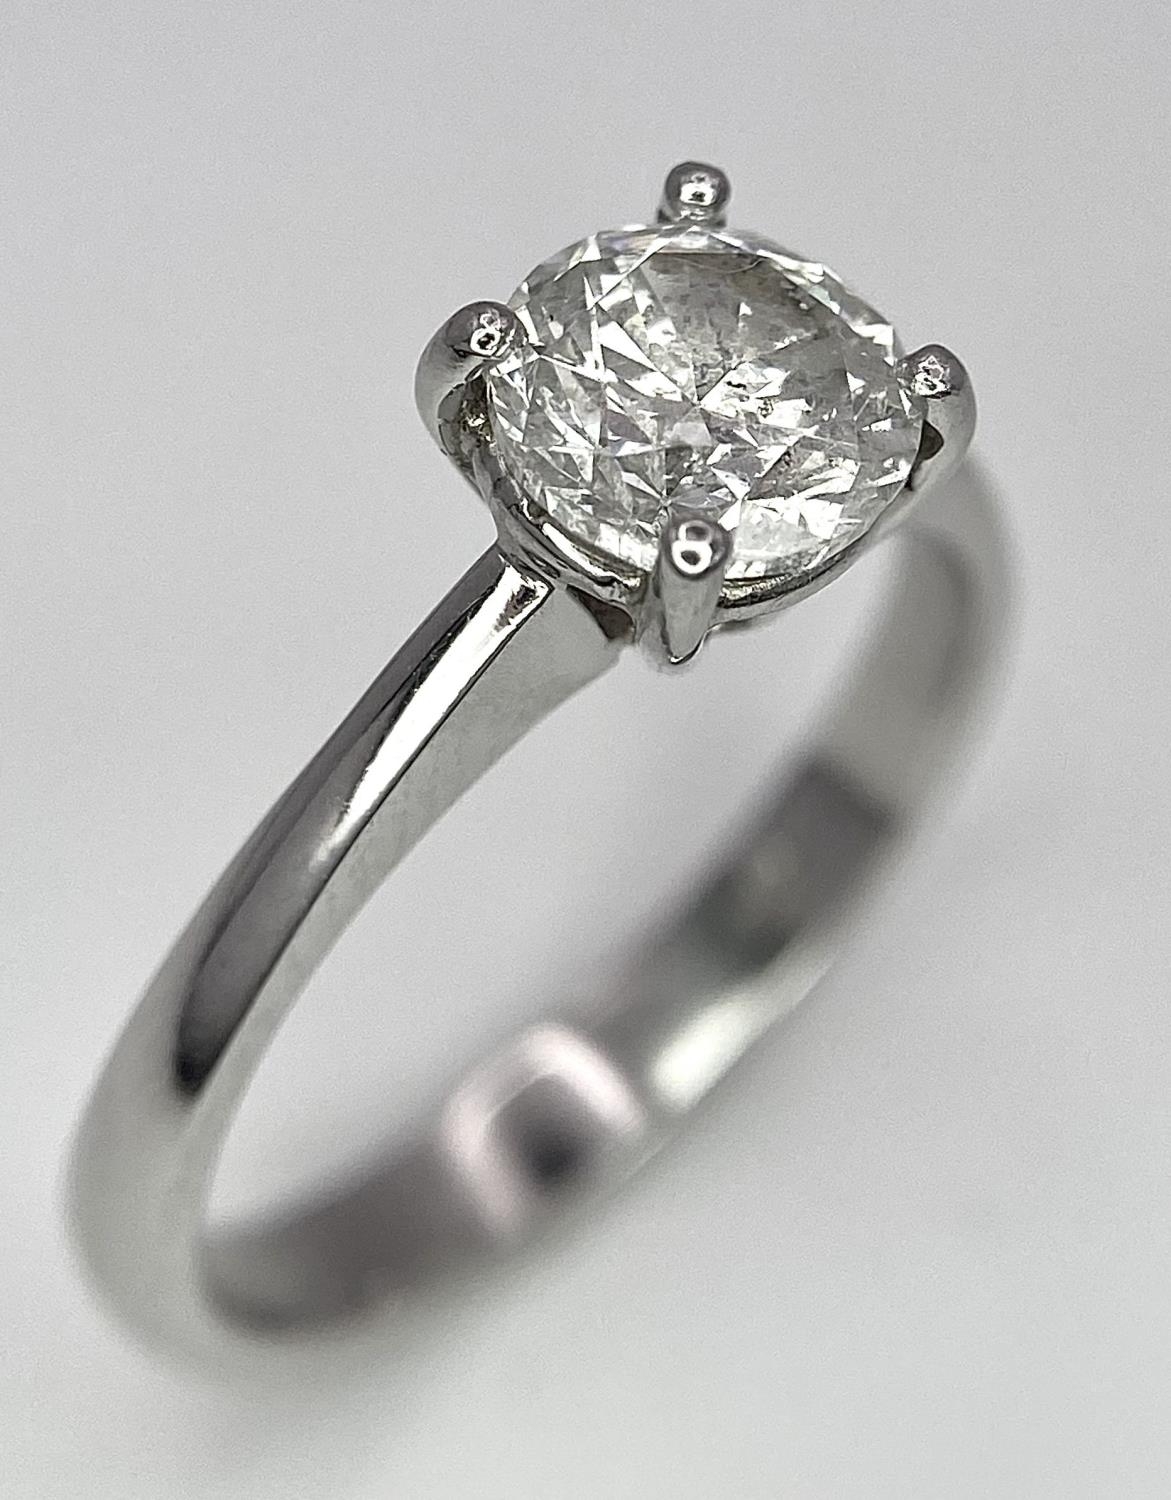 A Platinum Diamond Solitaire Ring. Size L. 4.1g total weight.